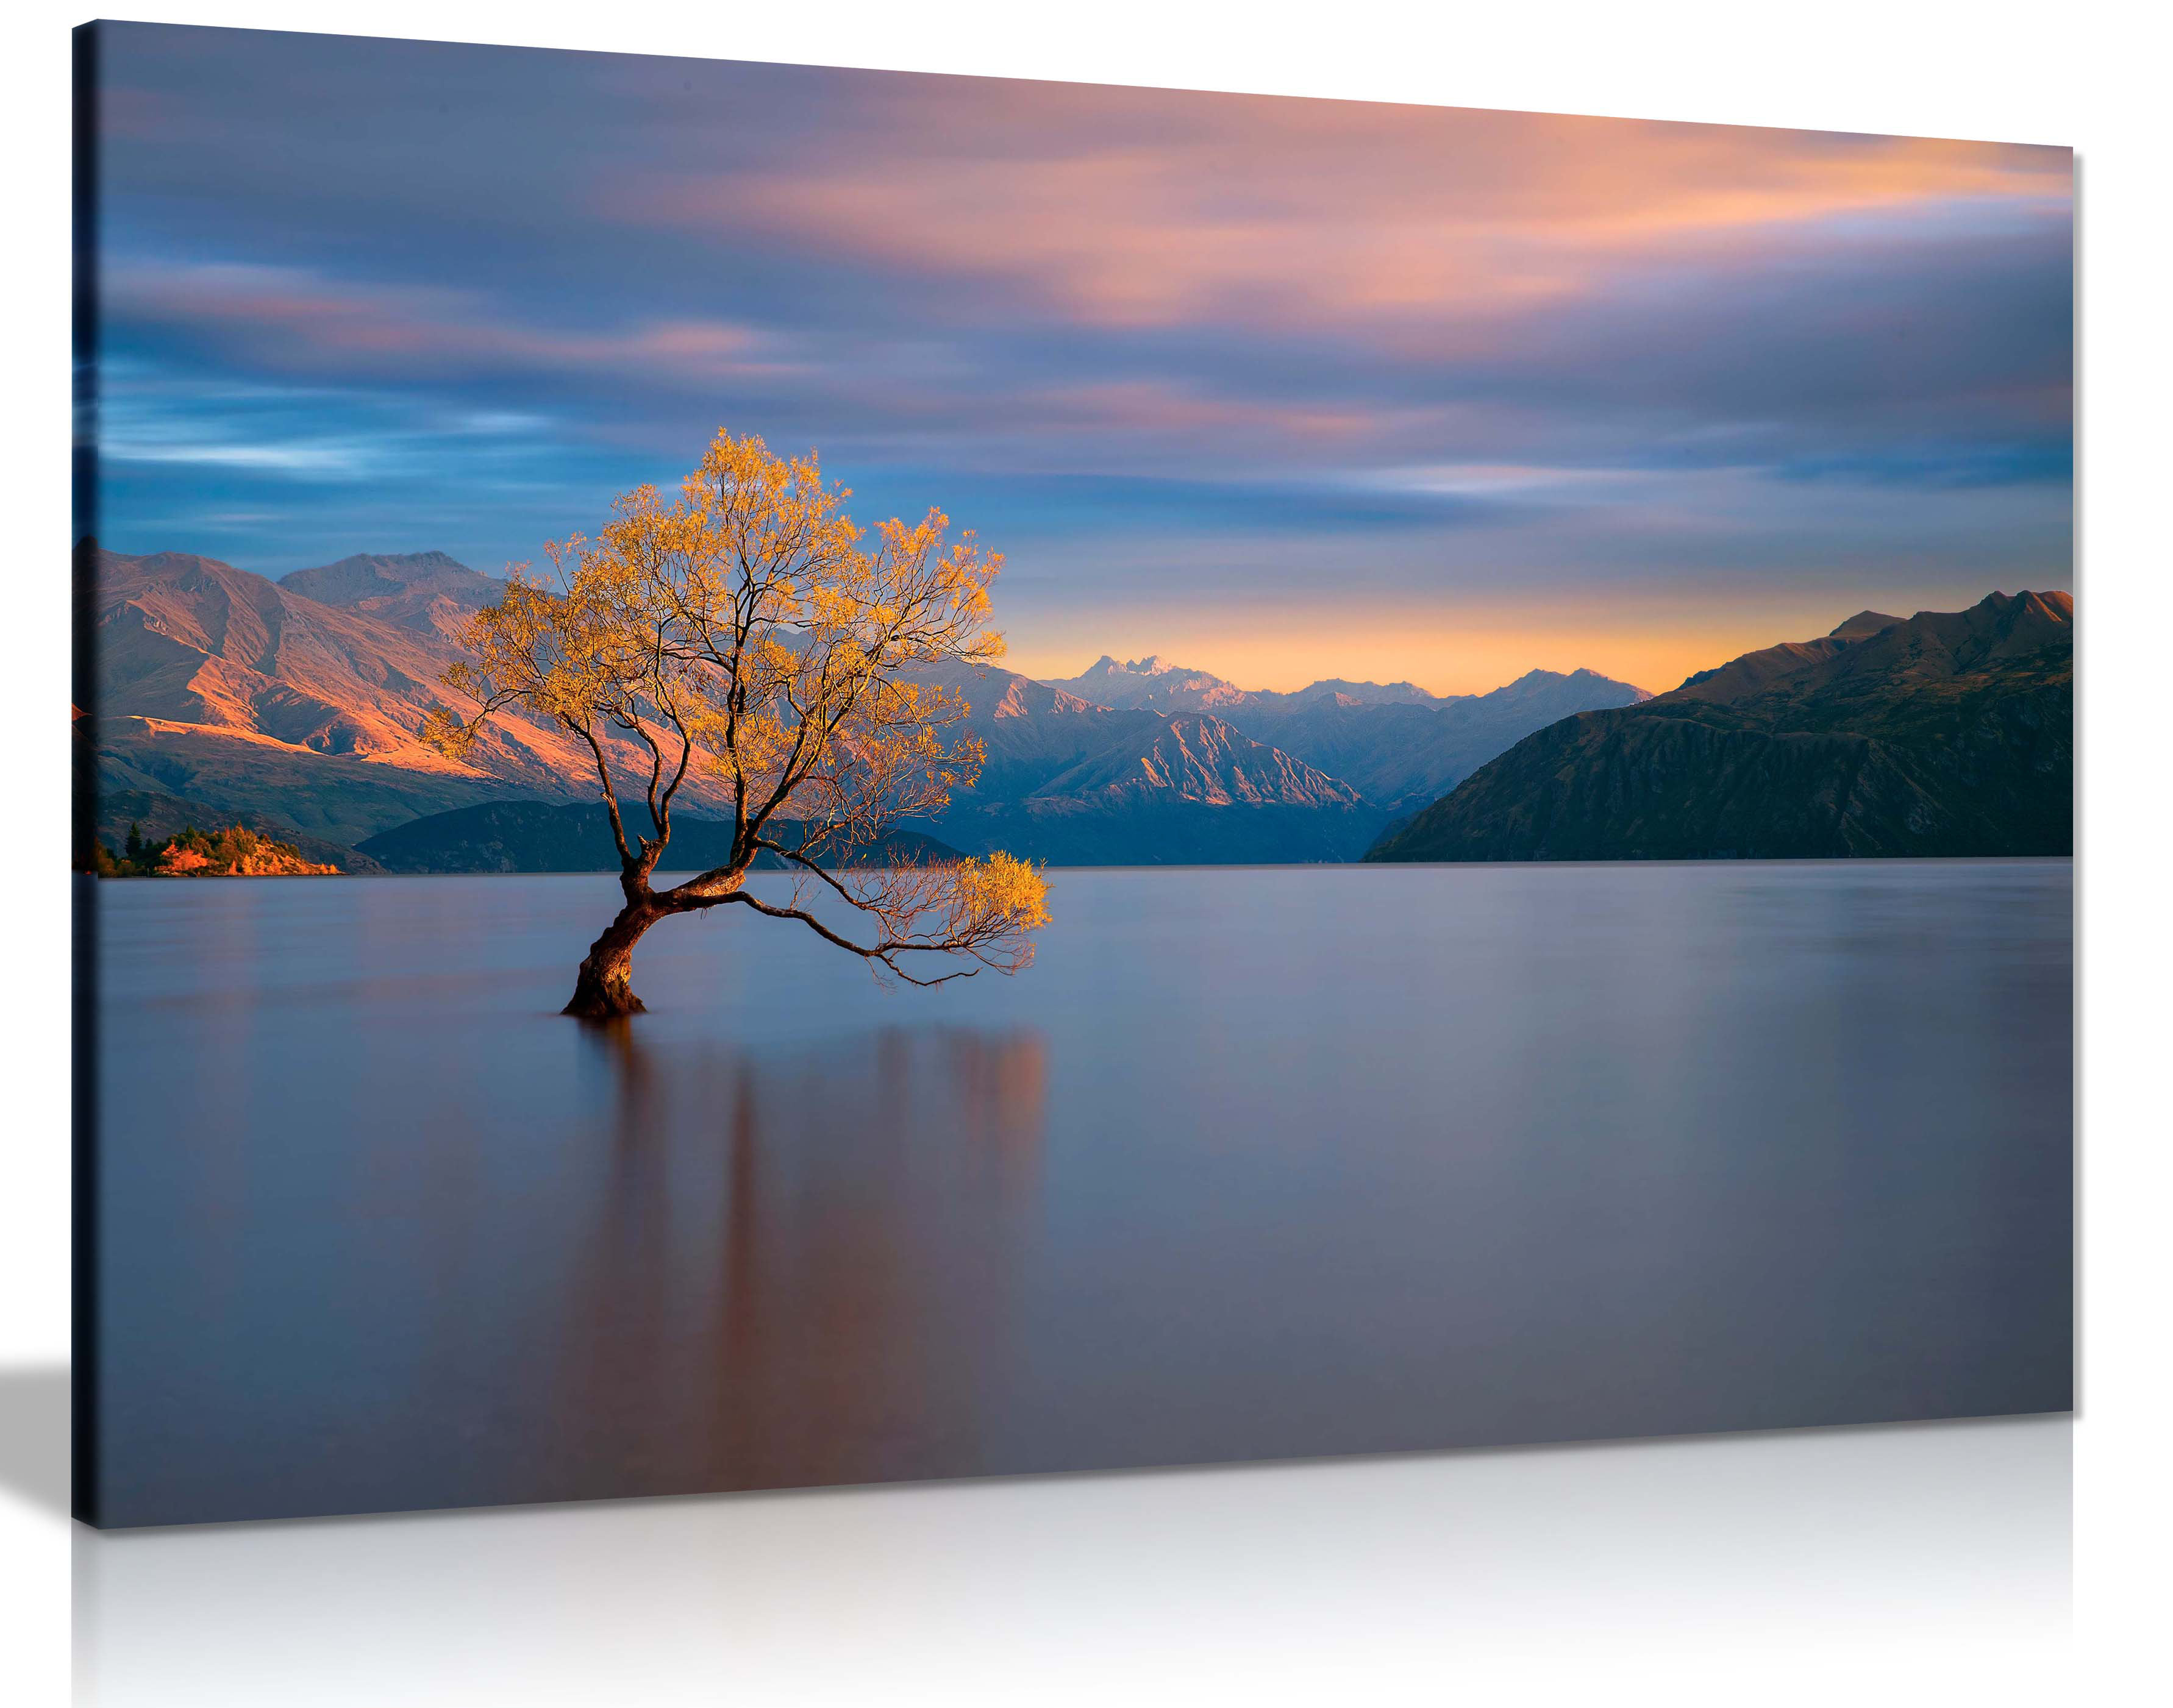 Panther Print Fine Art Prints Sunrise On Lake Wanaka Tree Artistic Framed  Canvas Prints, Pictures For Home Walls, Bedroom, Living Room  Bathroom  Decor Wrapped Canvas Art Prints